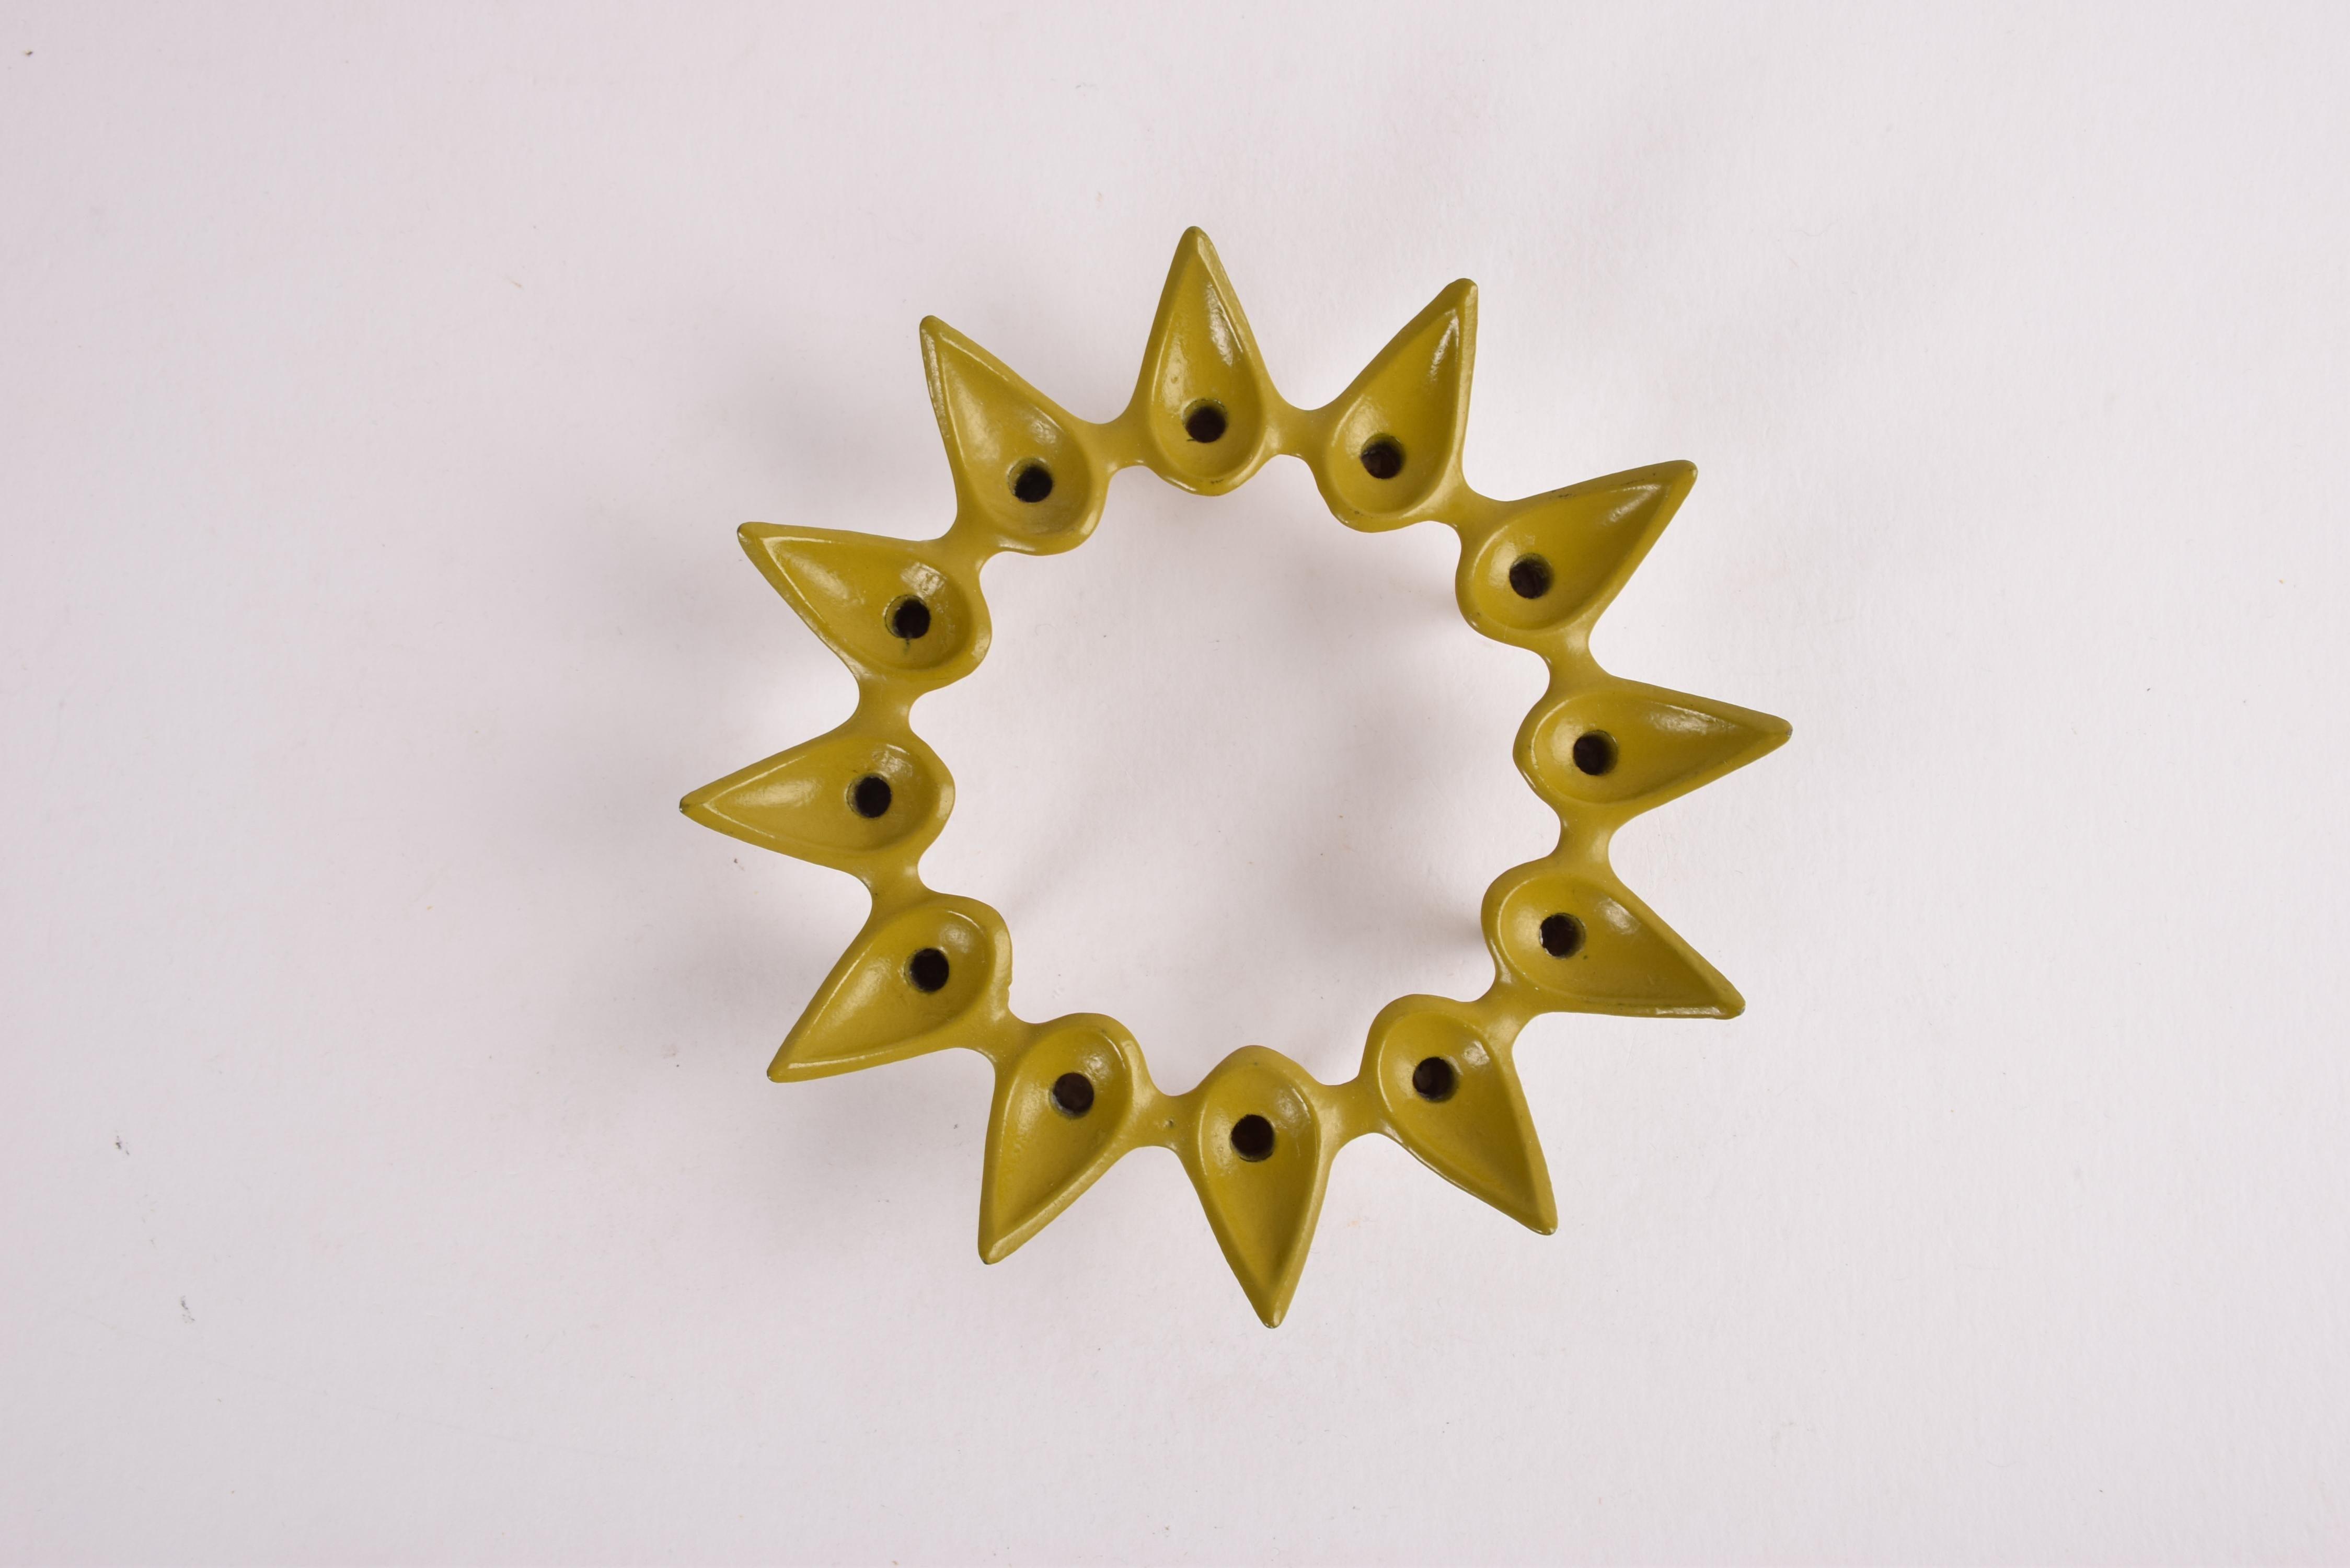 Danish Mid-Century Modern candle holder designed by Jens Harald Quistgaard for Dansk Internationals Ltd, USA. Made 1960s.

This is rare version with yellow green lacquer. It's made from cast iron and holds 12 slim candles. 

Very good vintage